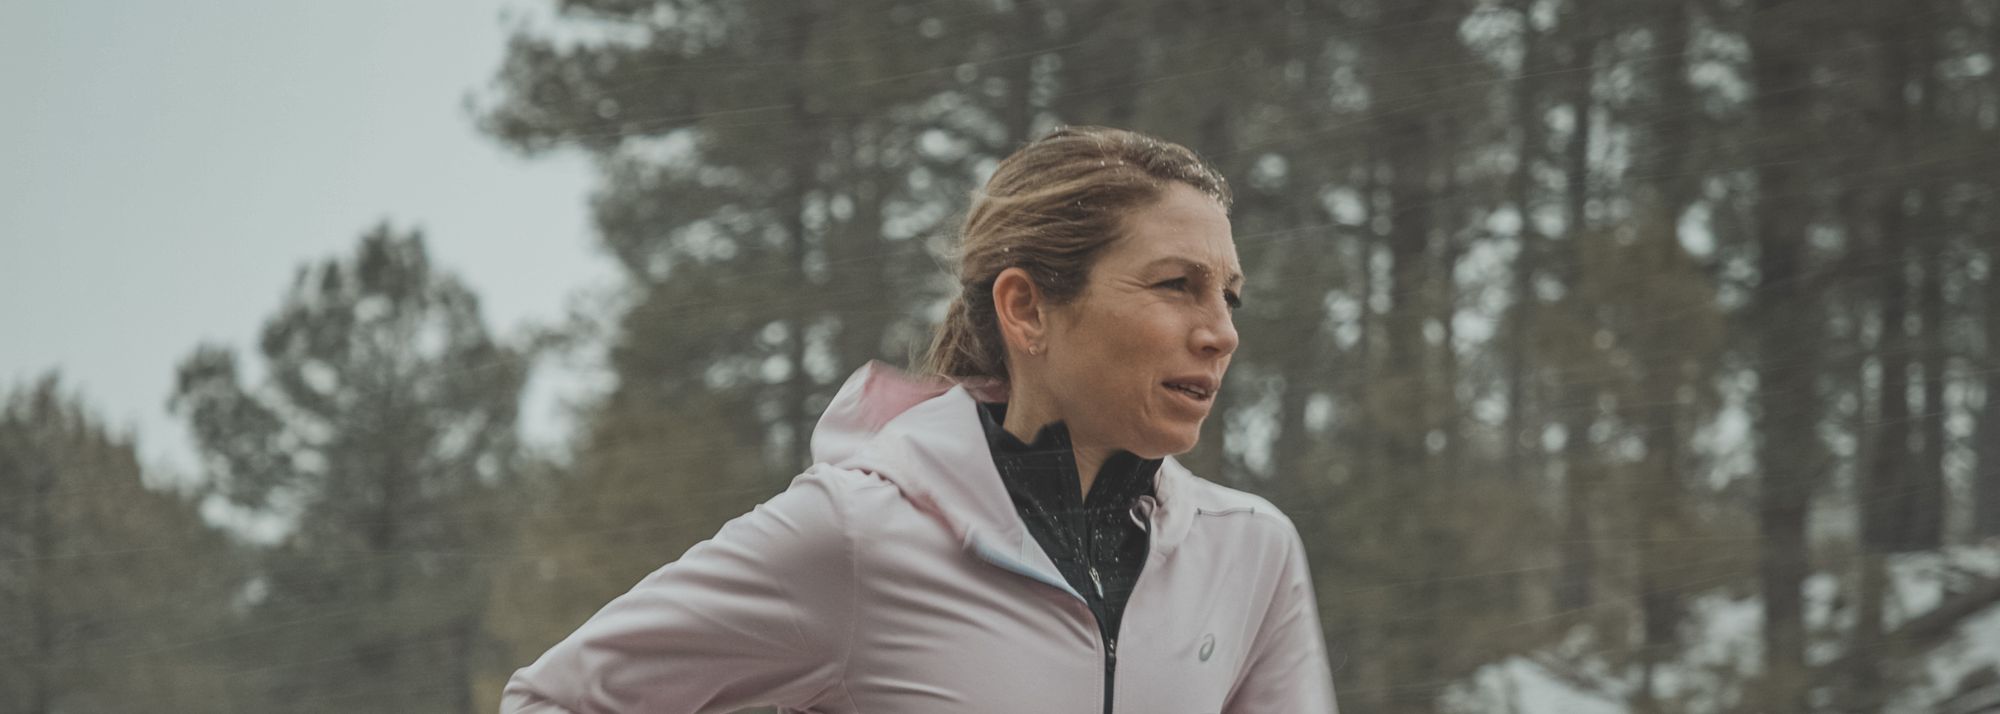 Molly Seidel, Sara Hall, and Emma Bates are part of a generational shift in American women’s marathoning.